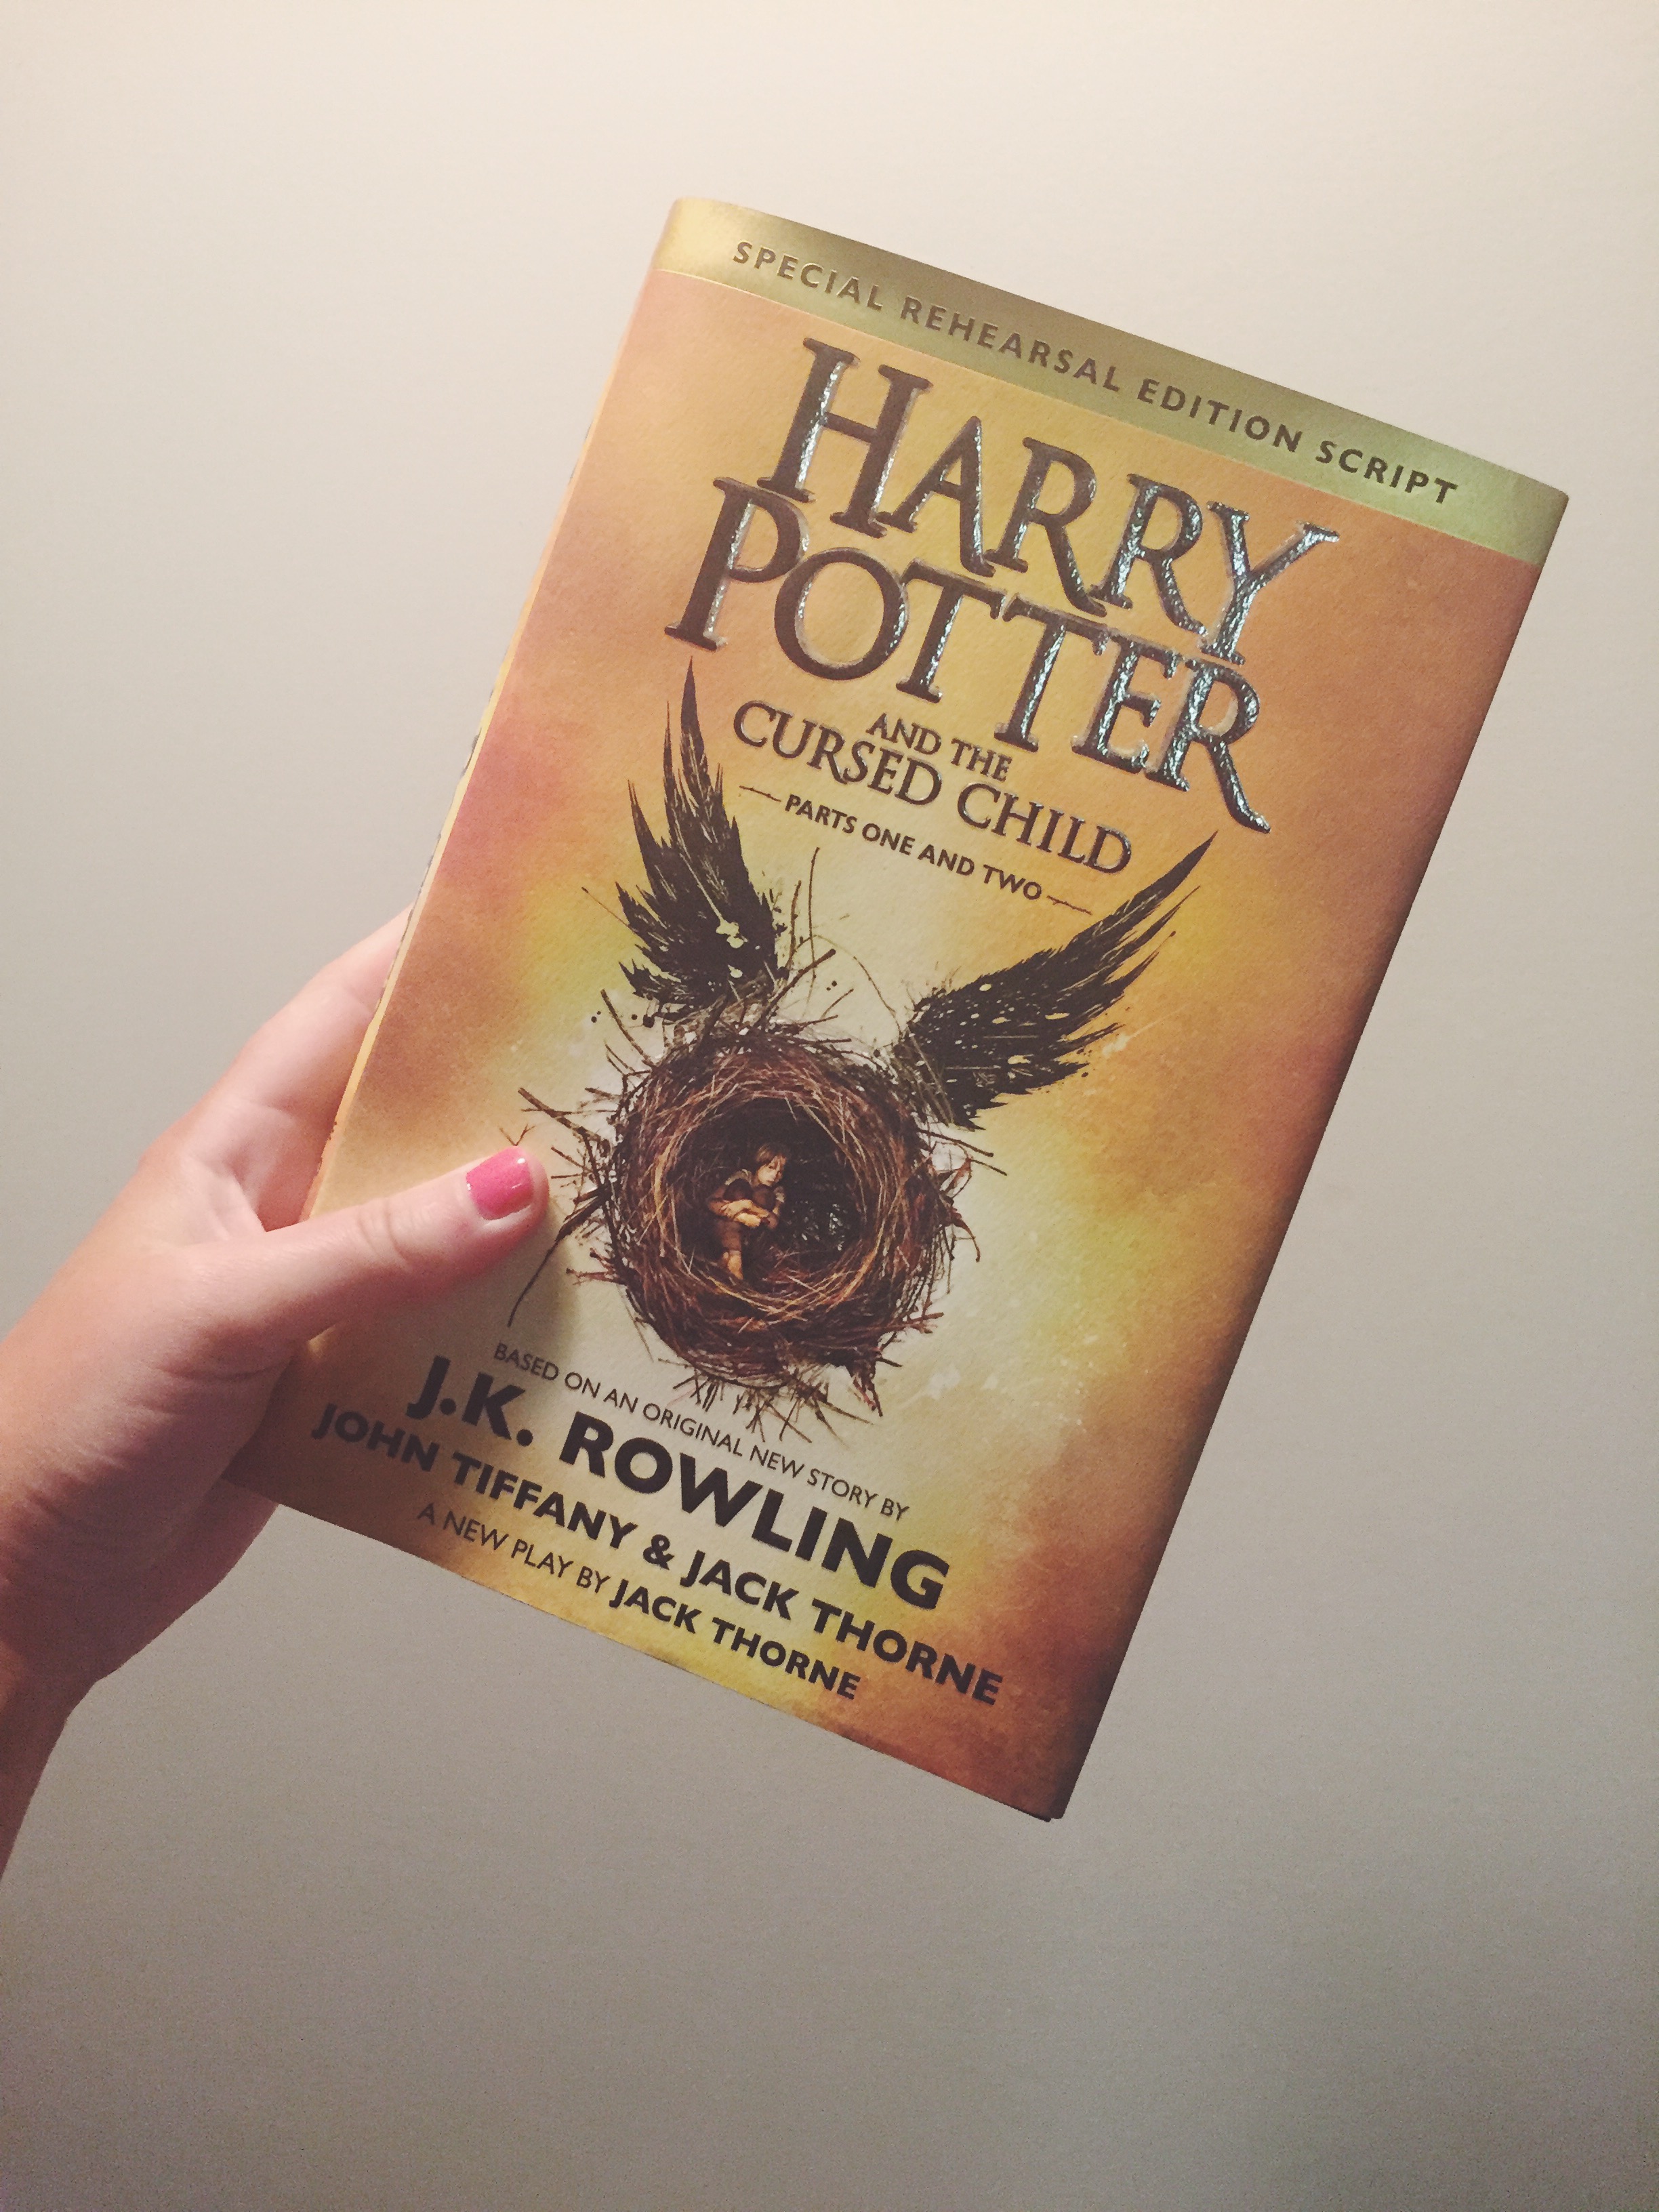 harry potter and the cursed child book book